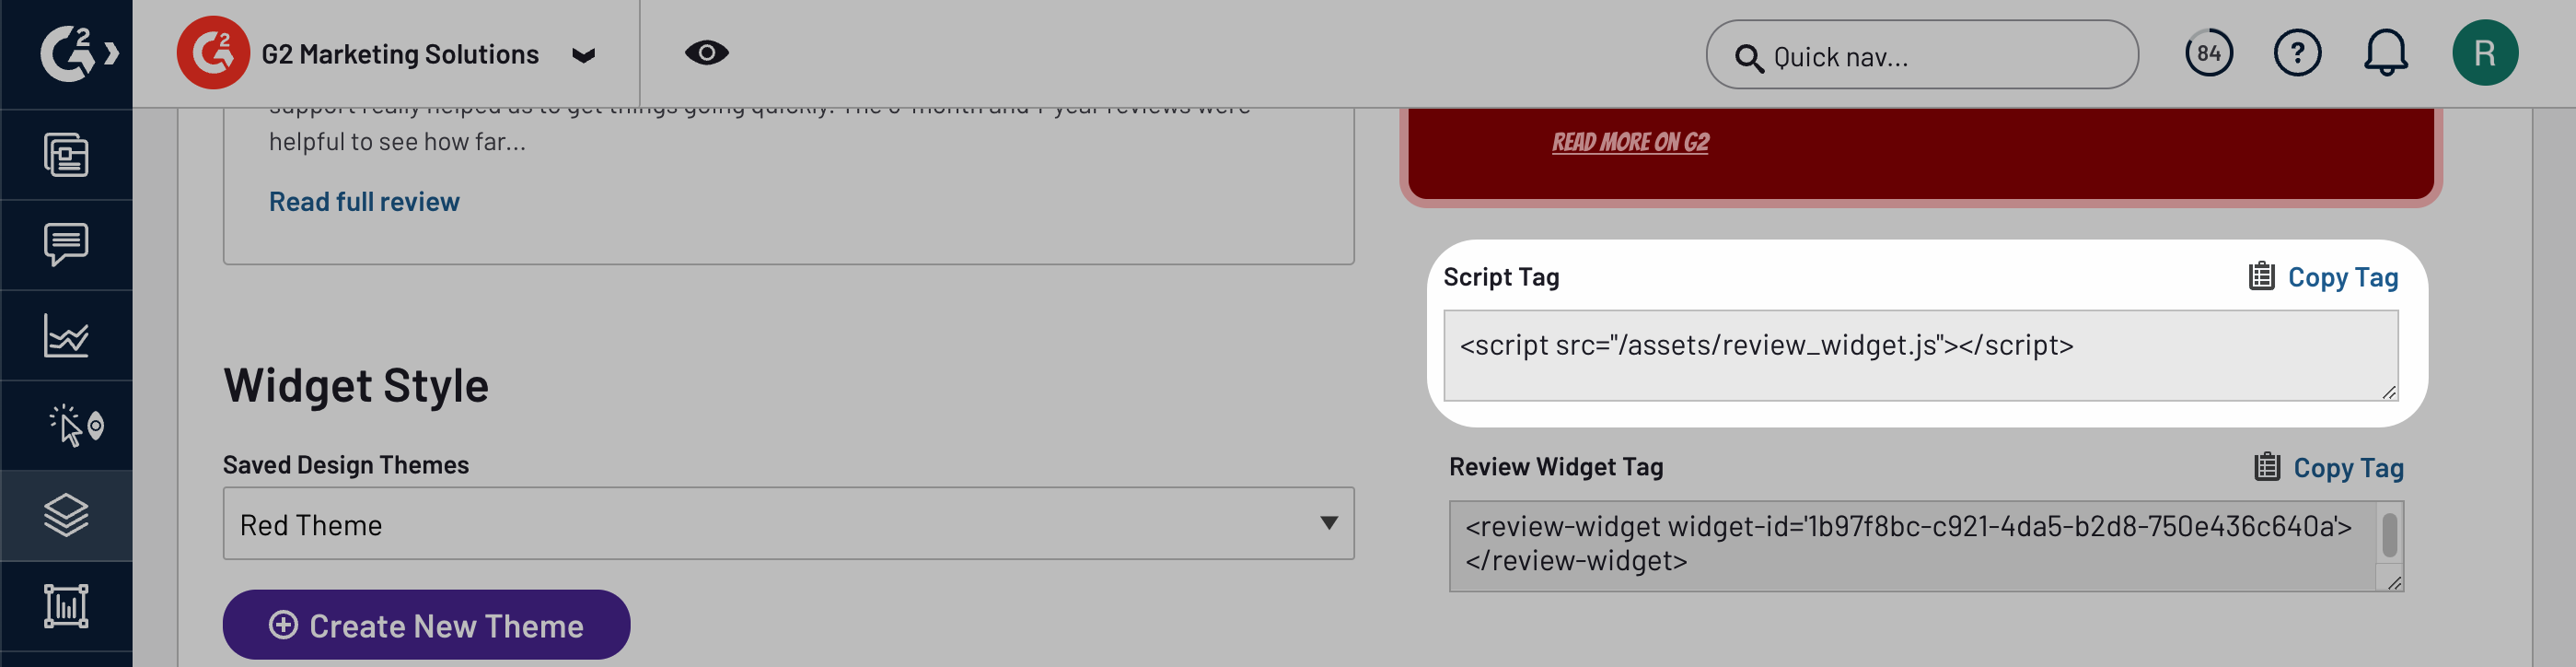 image showing script tag